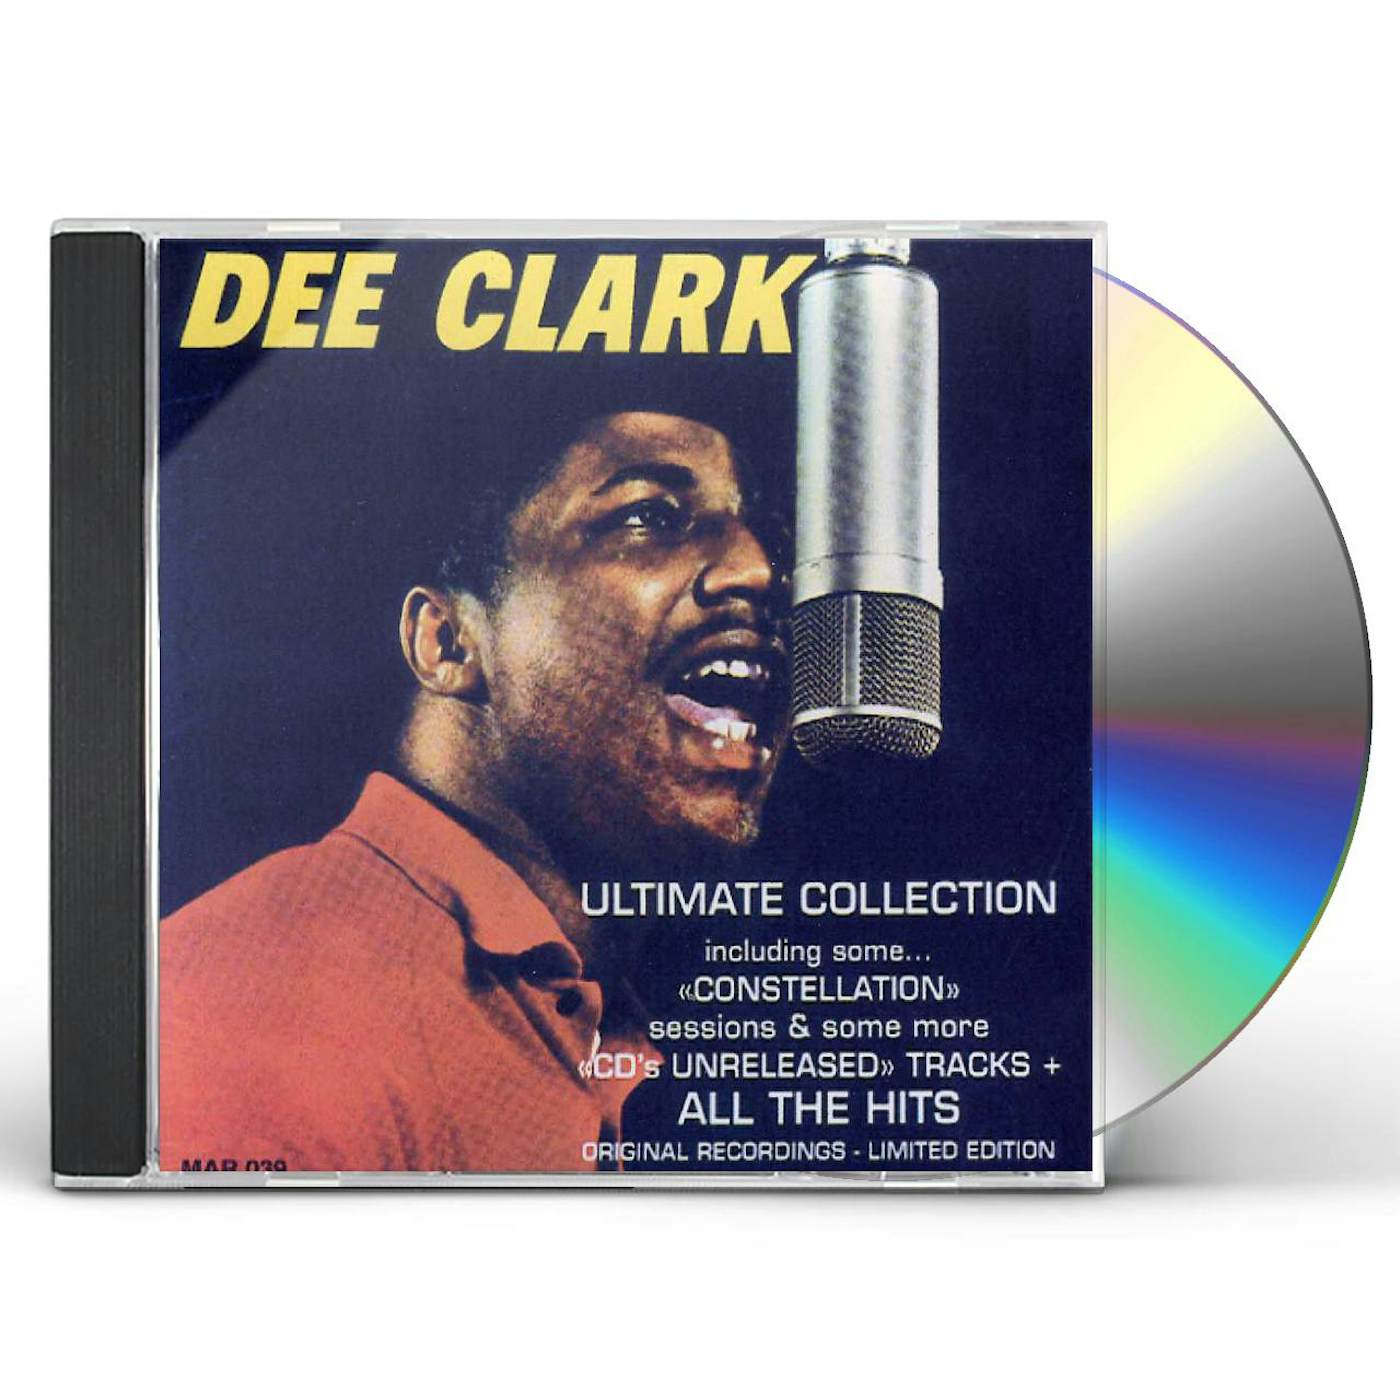 Dee Clark ULTIMATE COLLECTION CD